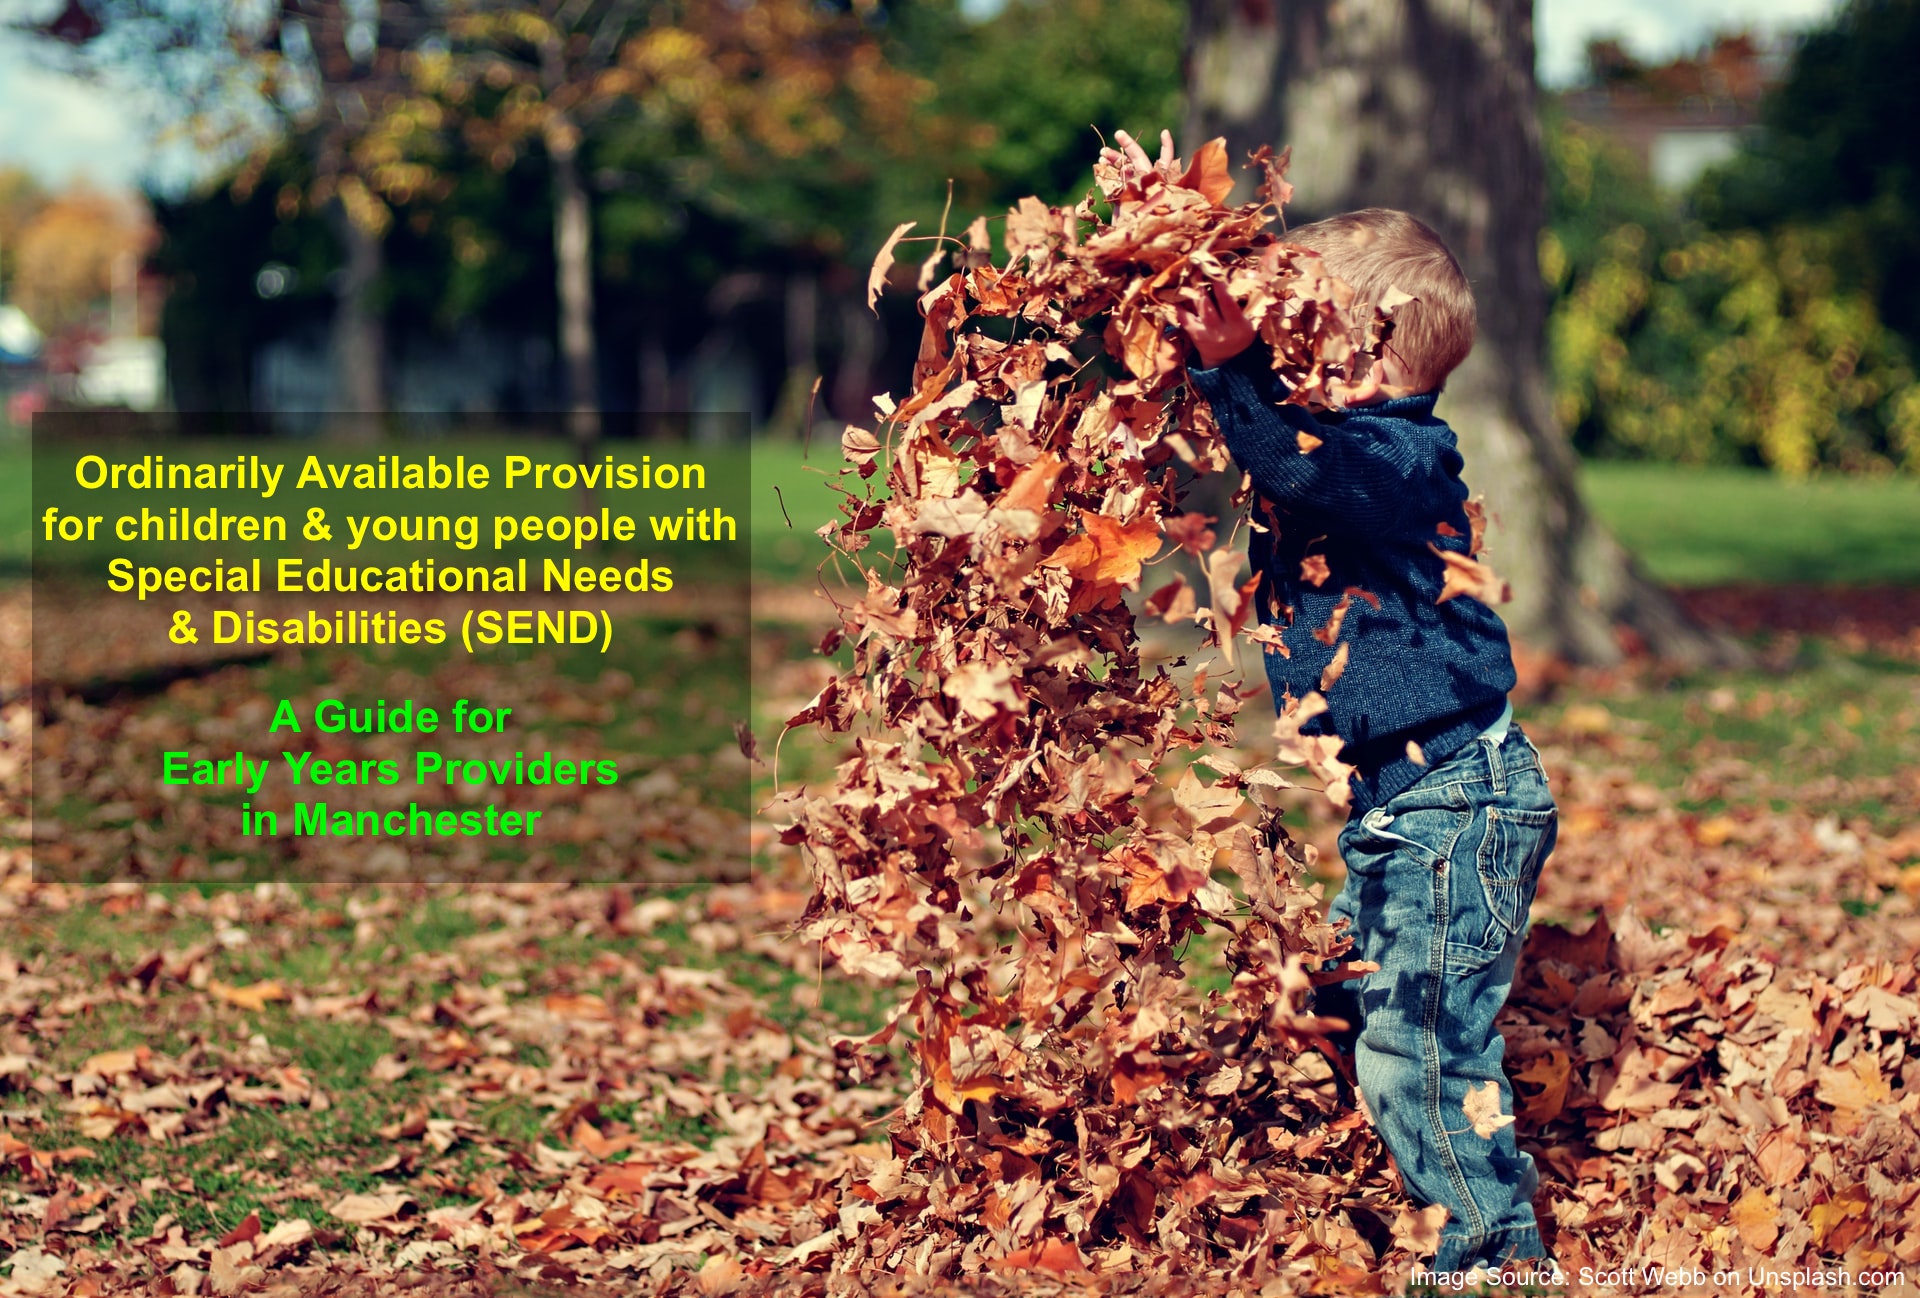 a young boy playing with dried leaves, with the text "Ordinarily Available Provision for children and young people with Special Educational Needs and Disabilities (SEND) A Guide for Early Years Providers in Manchester" superimposed on the foreground | image credit: Scott Webb via Unsplash.com